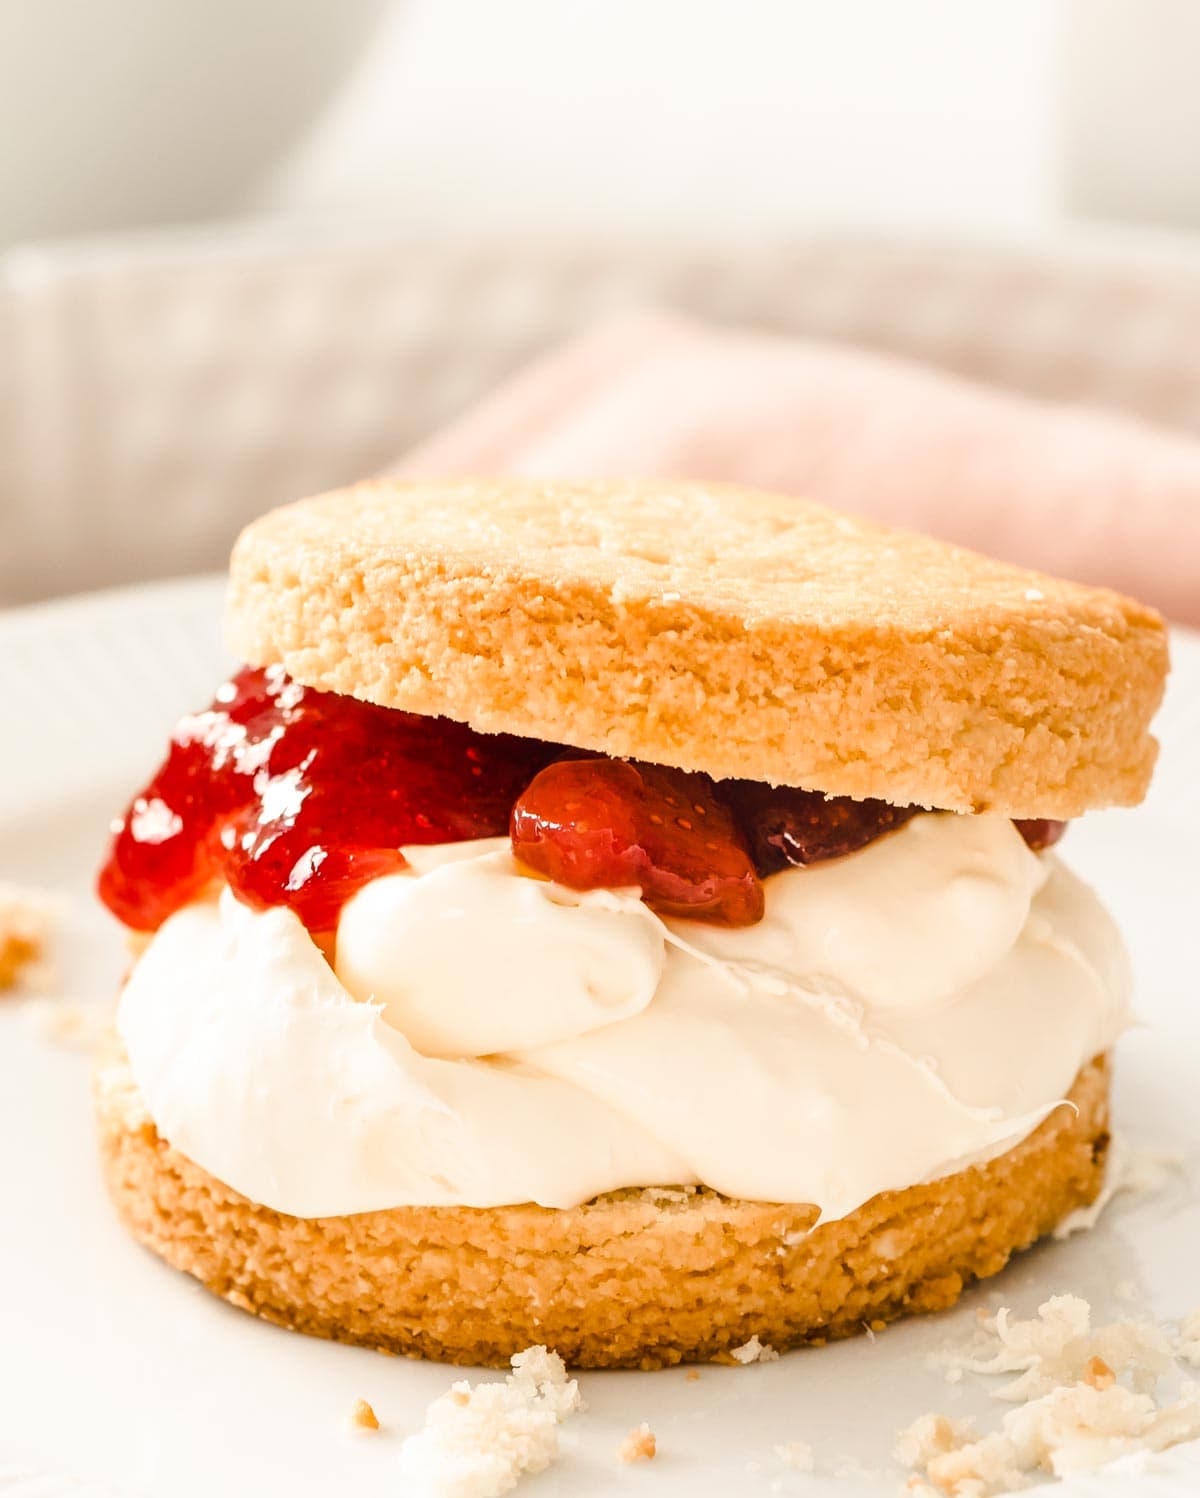 a keto scone made with almond flour cut in half and filled with clotted cream and strawberry jam on a white plate